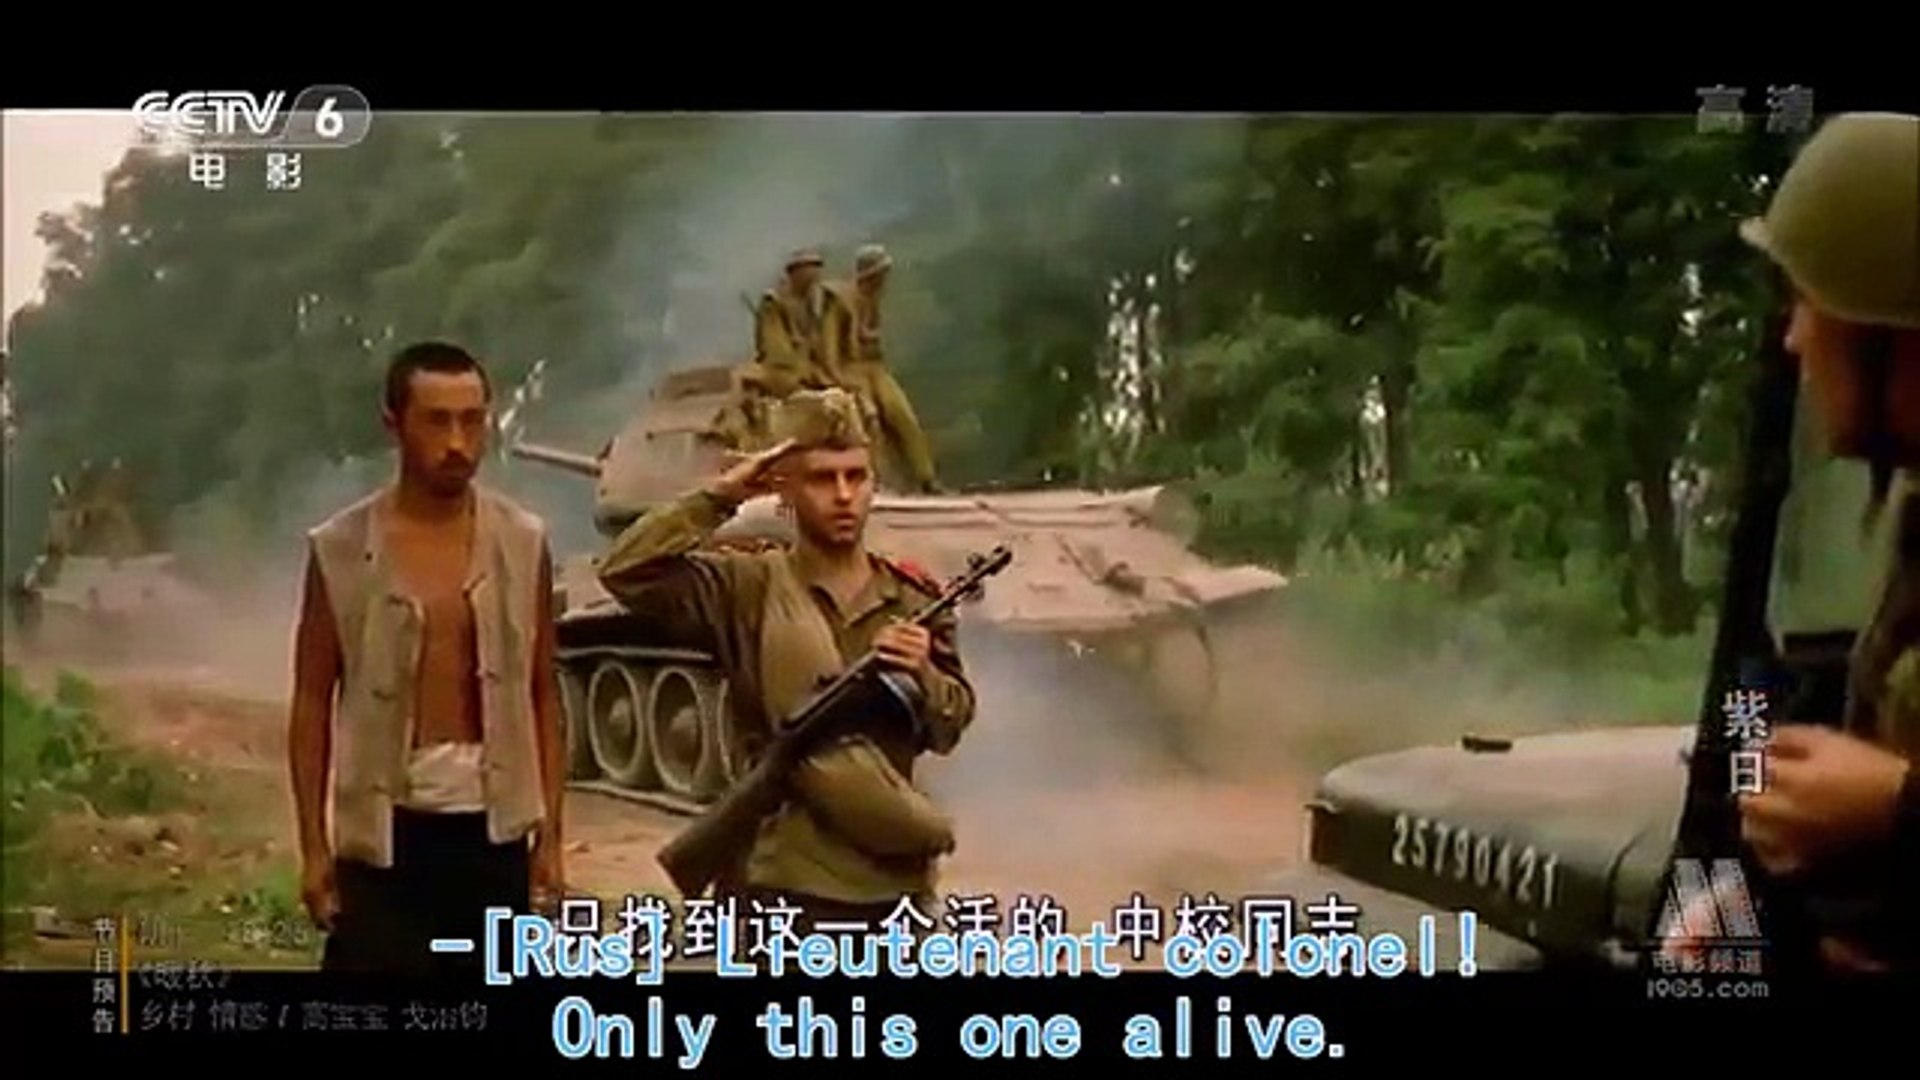 Chinese Action War Movies With English Subtitle   Great War Movies High Quality , Cinema Movies Tv F